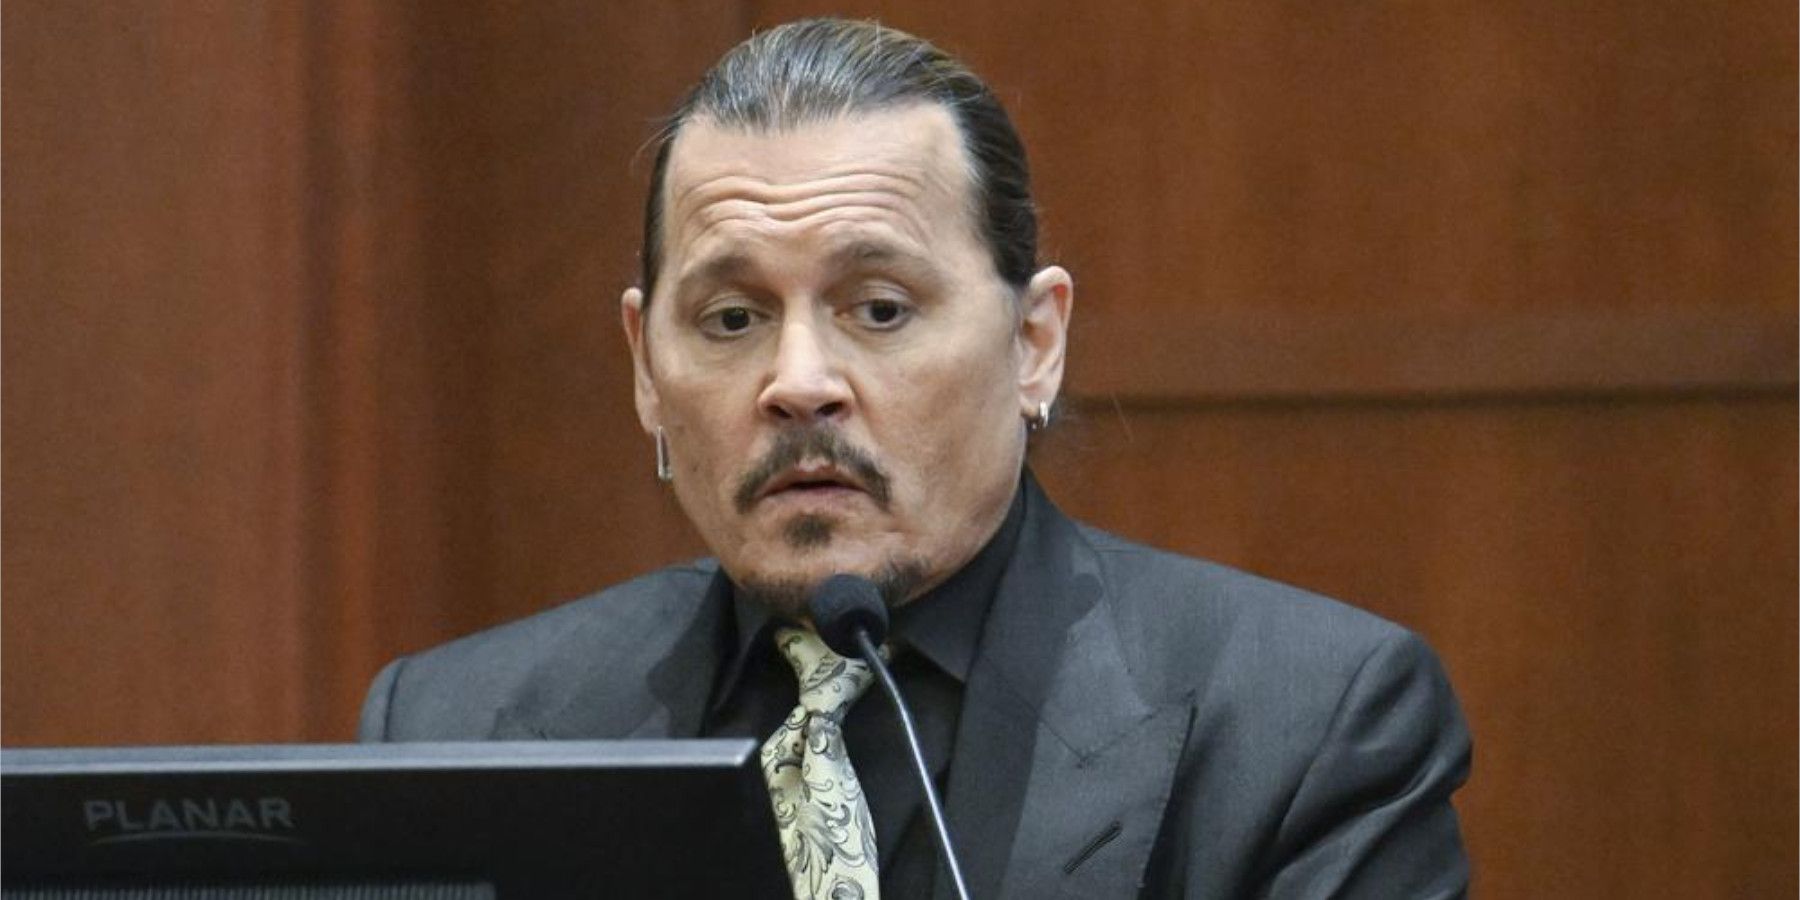 Johnny Depp, a famous actor, appears in a suit behind a court room microphone.